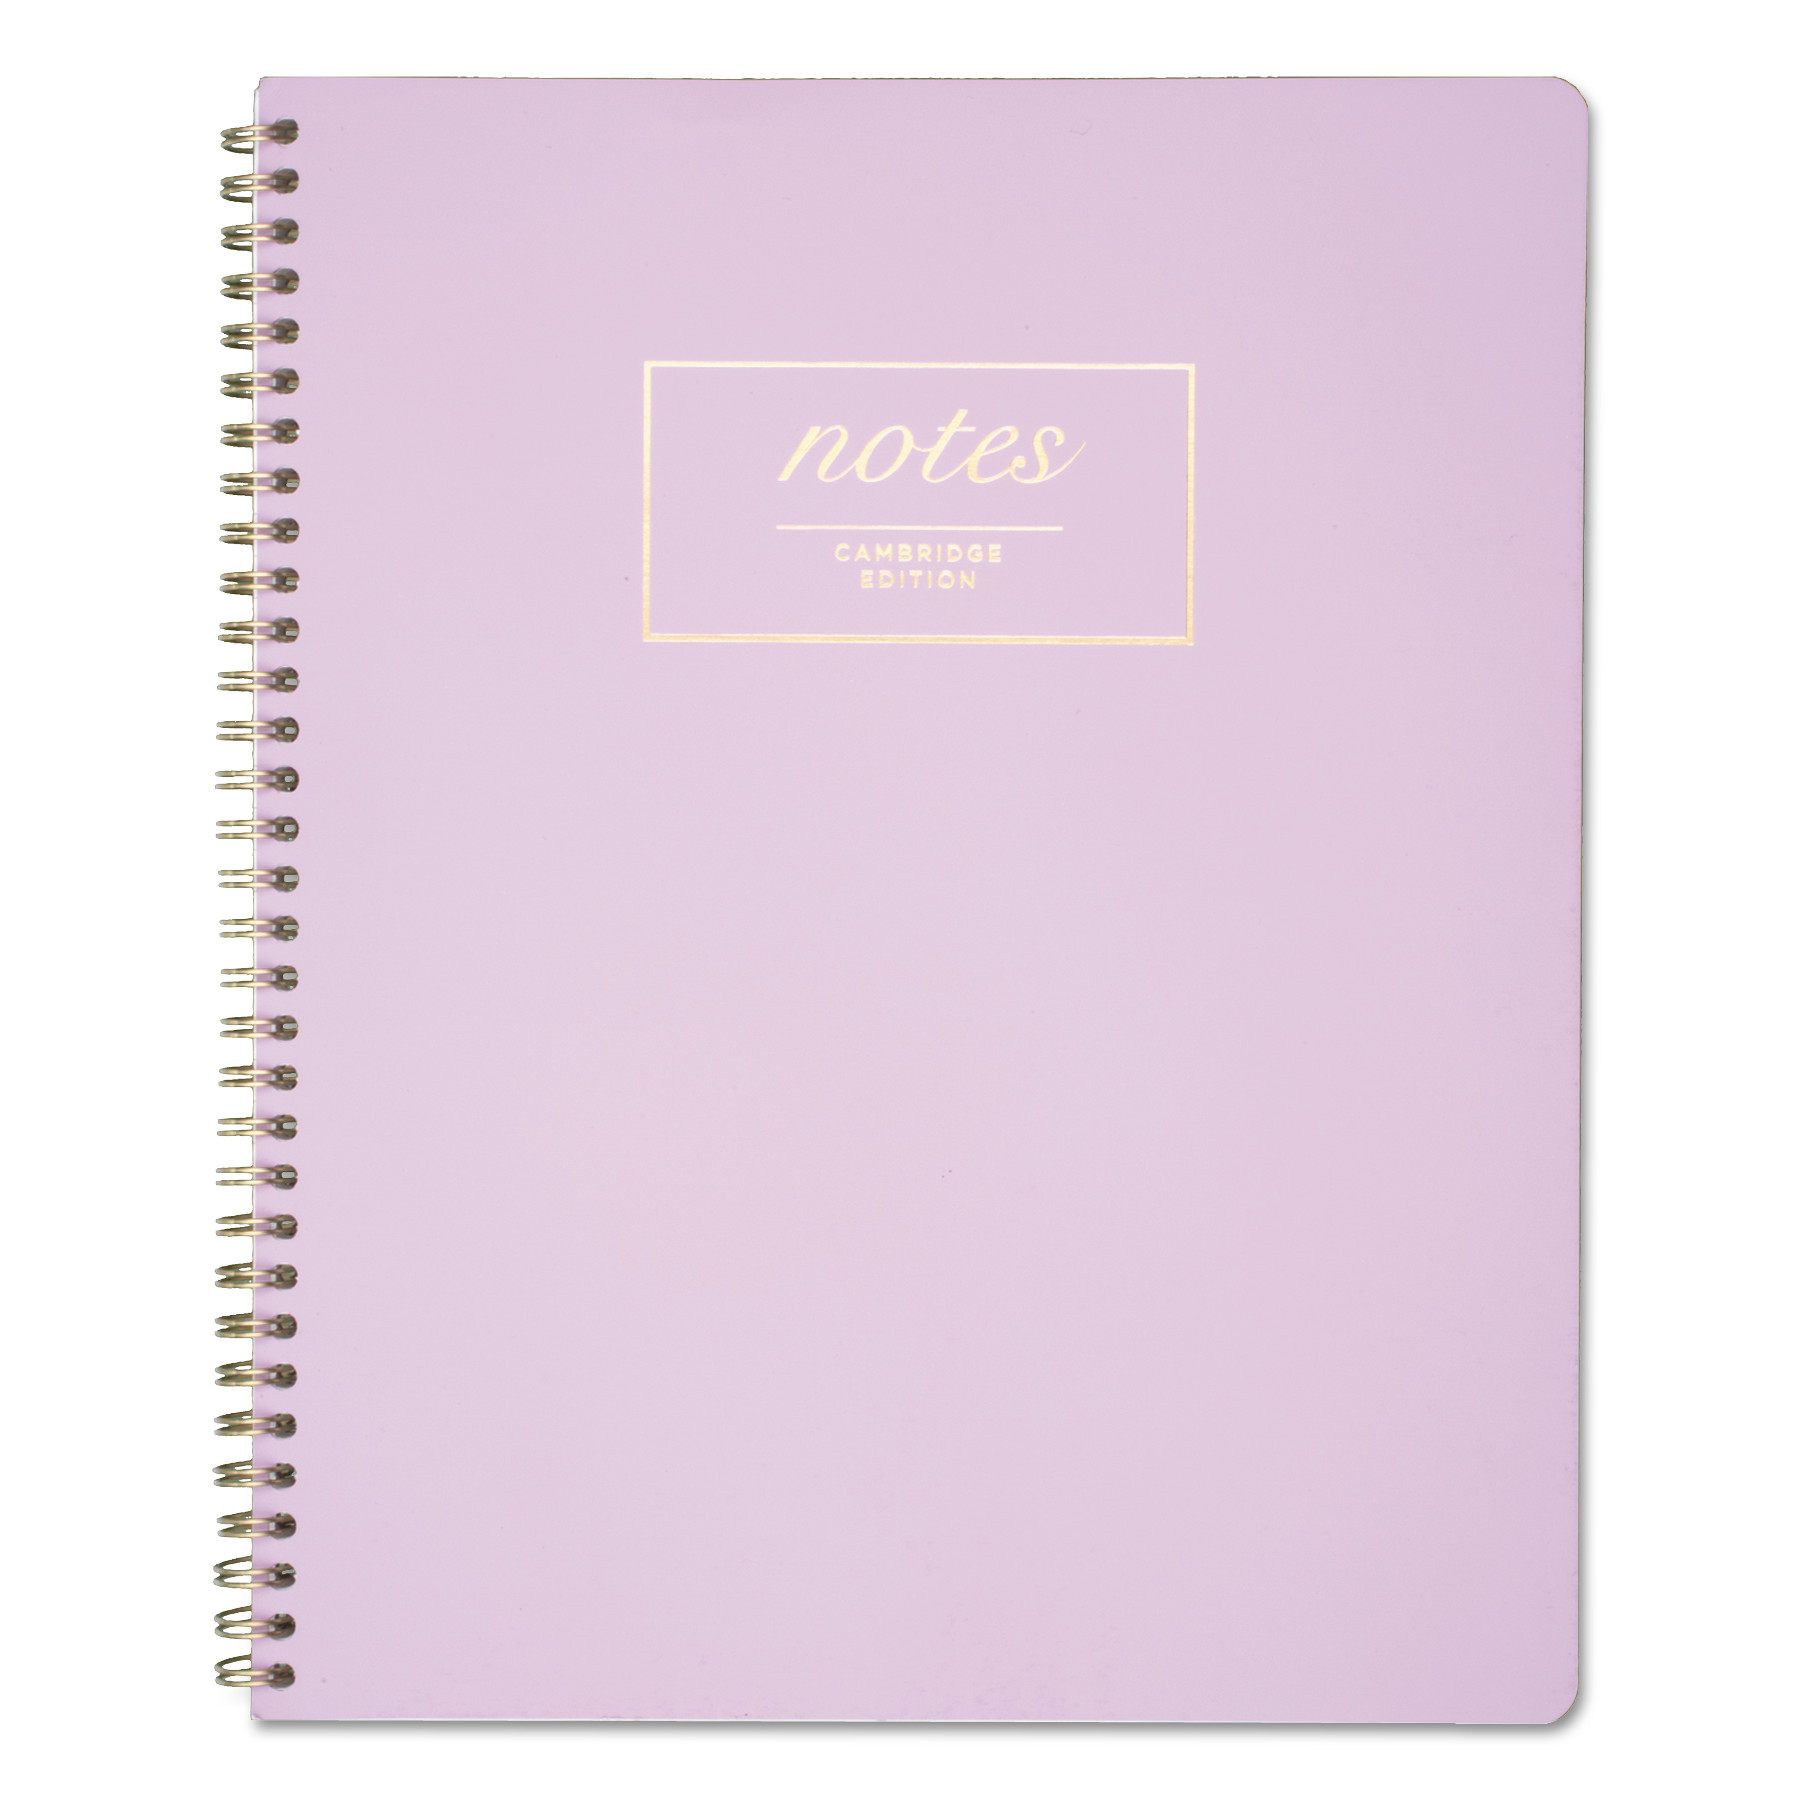  Cambridge 59315 Workstyle Notebook, 1 Subject, Wide/Legal Rule, Lavender Cover, 11 x 9, 80 Sheets (MEA59315) 